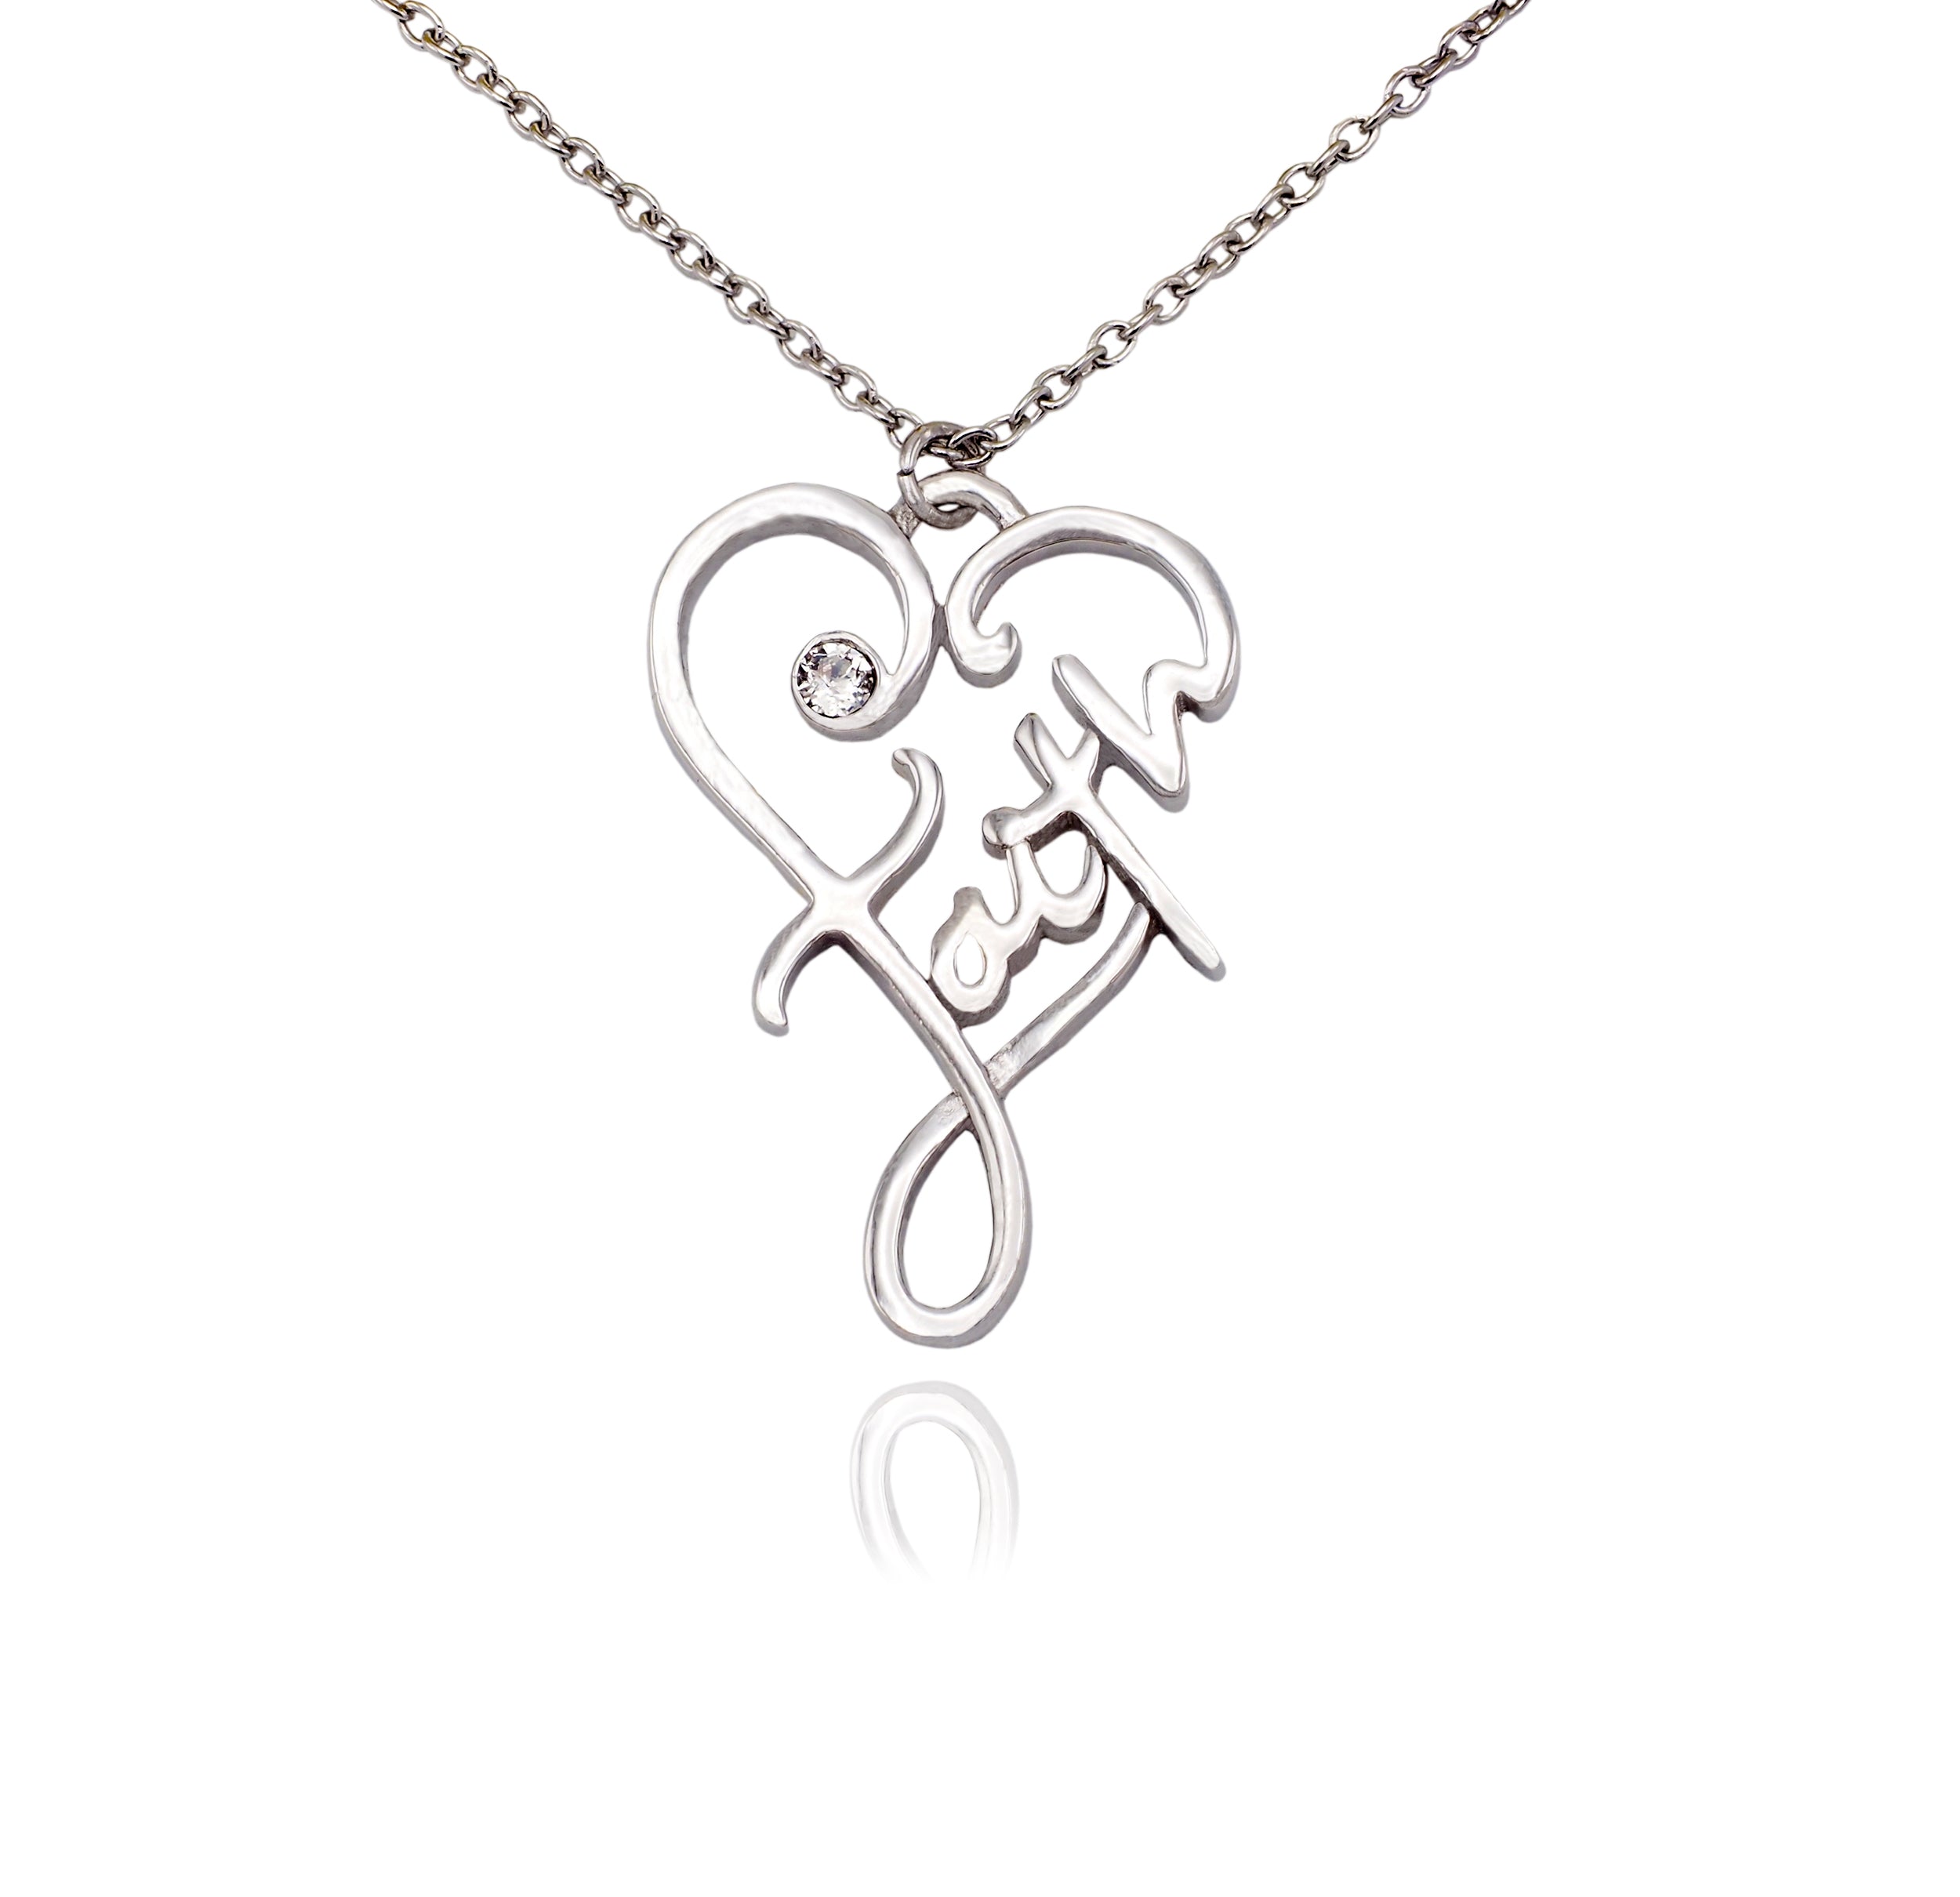 Joyfulle Emani Faith Heart Pendant Necklace, Gifts for Women with Inspirational Greeting Card